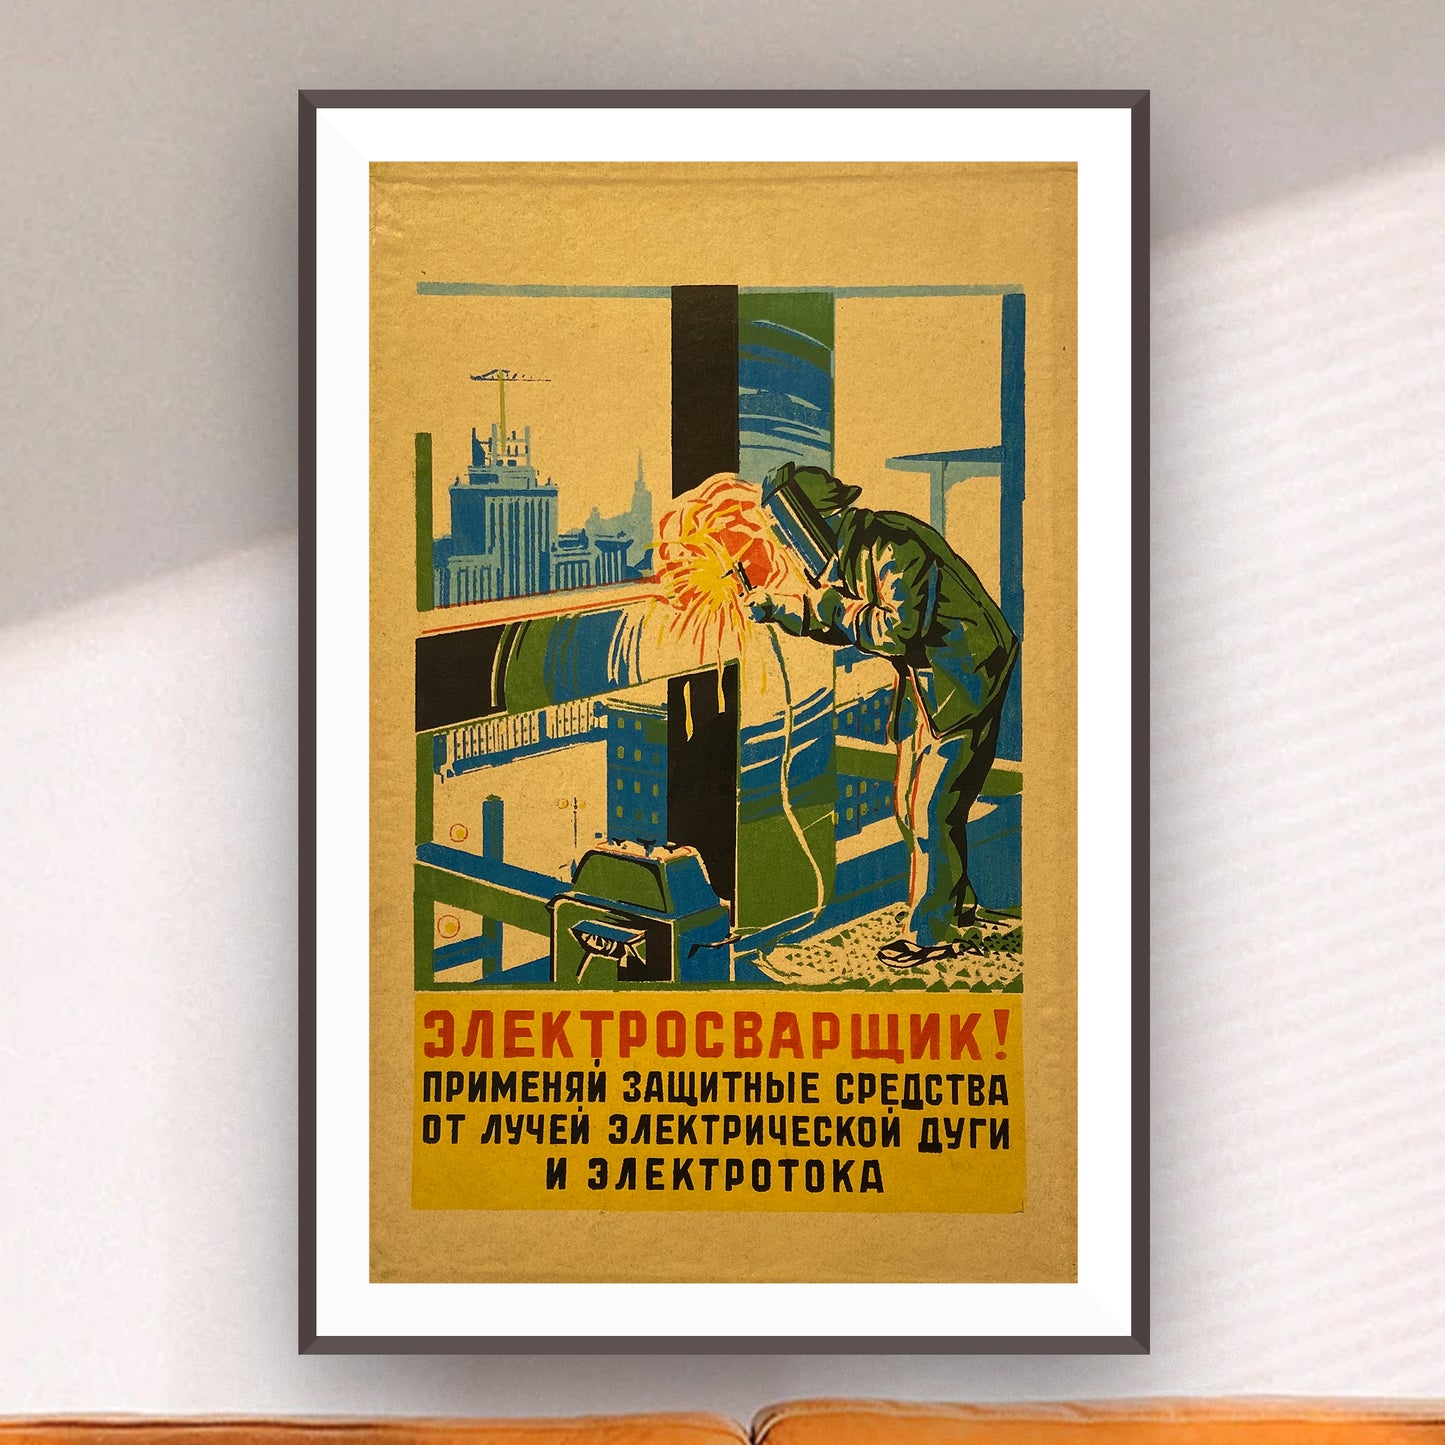 Poster, "Electric welder! Use protective equipment against rays of electric arcs and electric currents.", Worker safety VEF Riga, Latvian SSR, 1960s